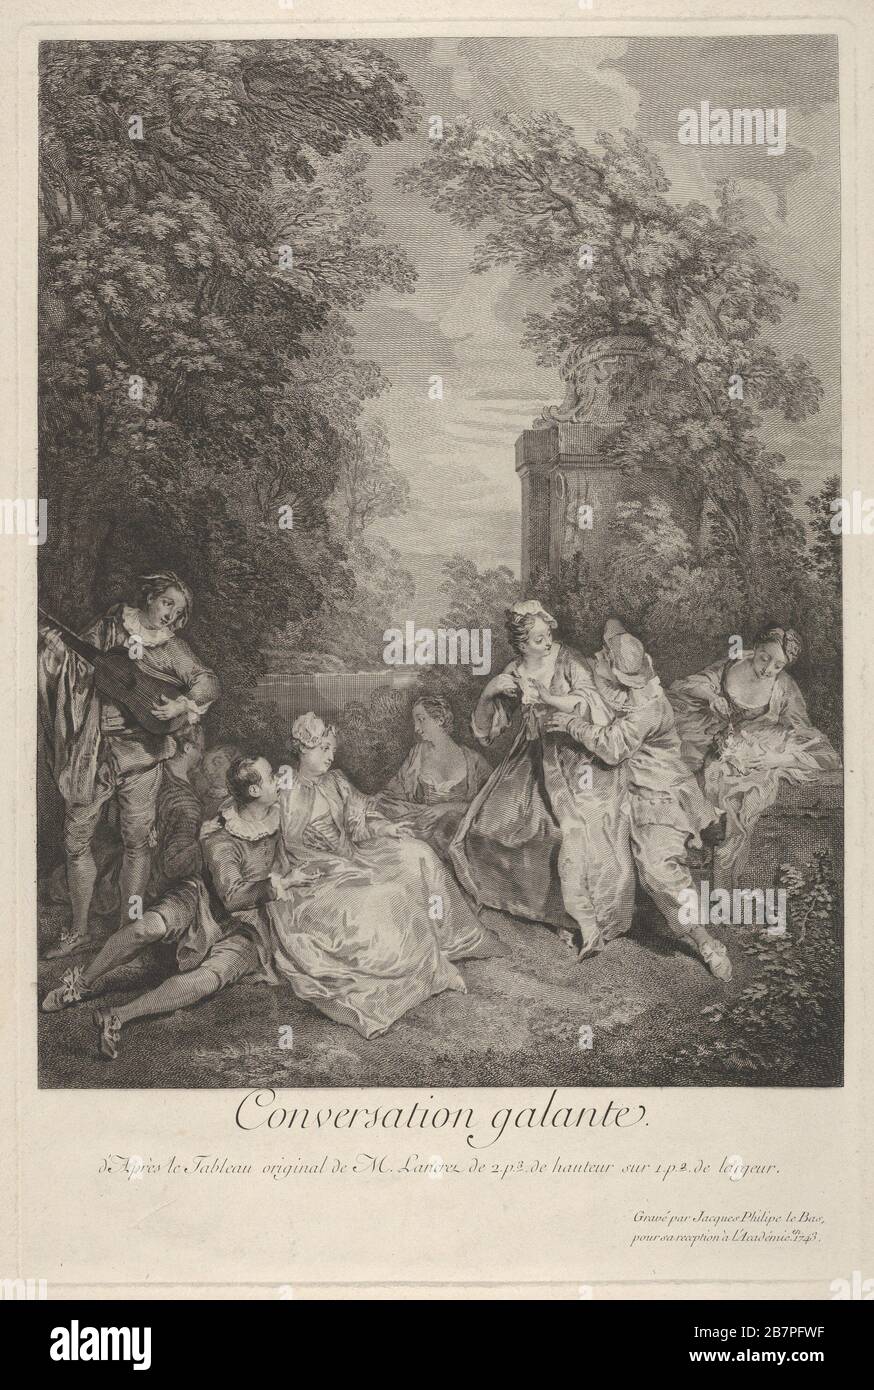 Gallant conversation' (Conversation galante): couples engage in conversation in a garden setting, at left a musician plays for the group, at right a woman holds a reclining lap dog, 1743. After Nicolas Lancret Stock Photo